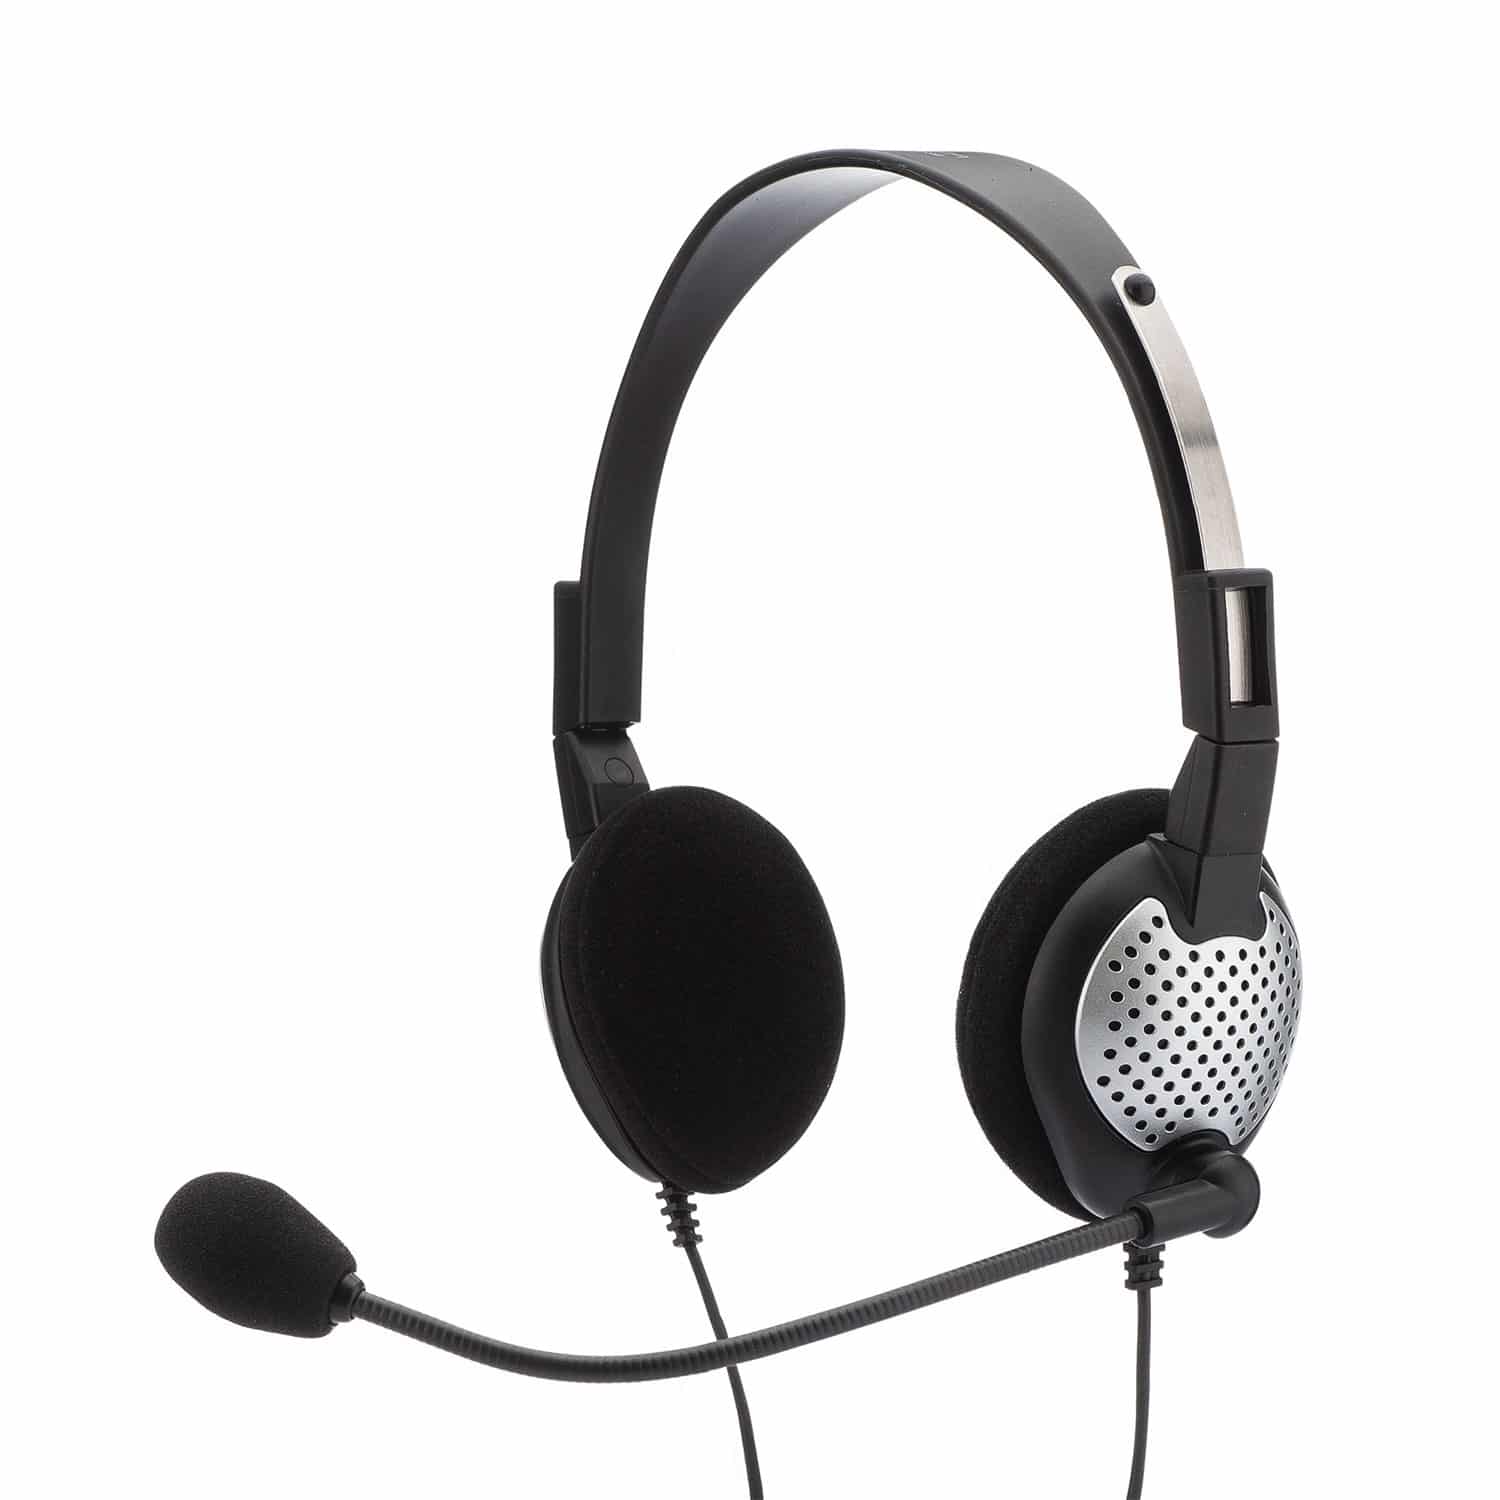 Andrea Communications C1-1022600-1 (NC-185VM USB) On-Ear Stereo Headset with noise-canceling microphone